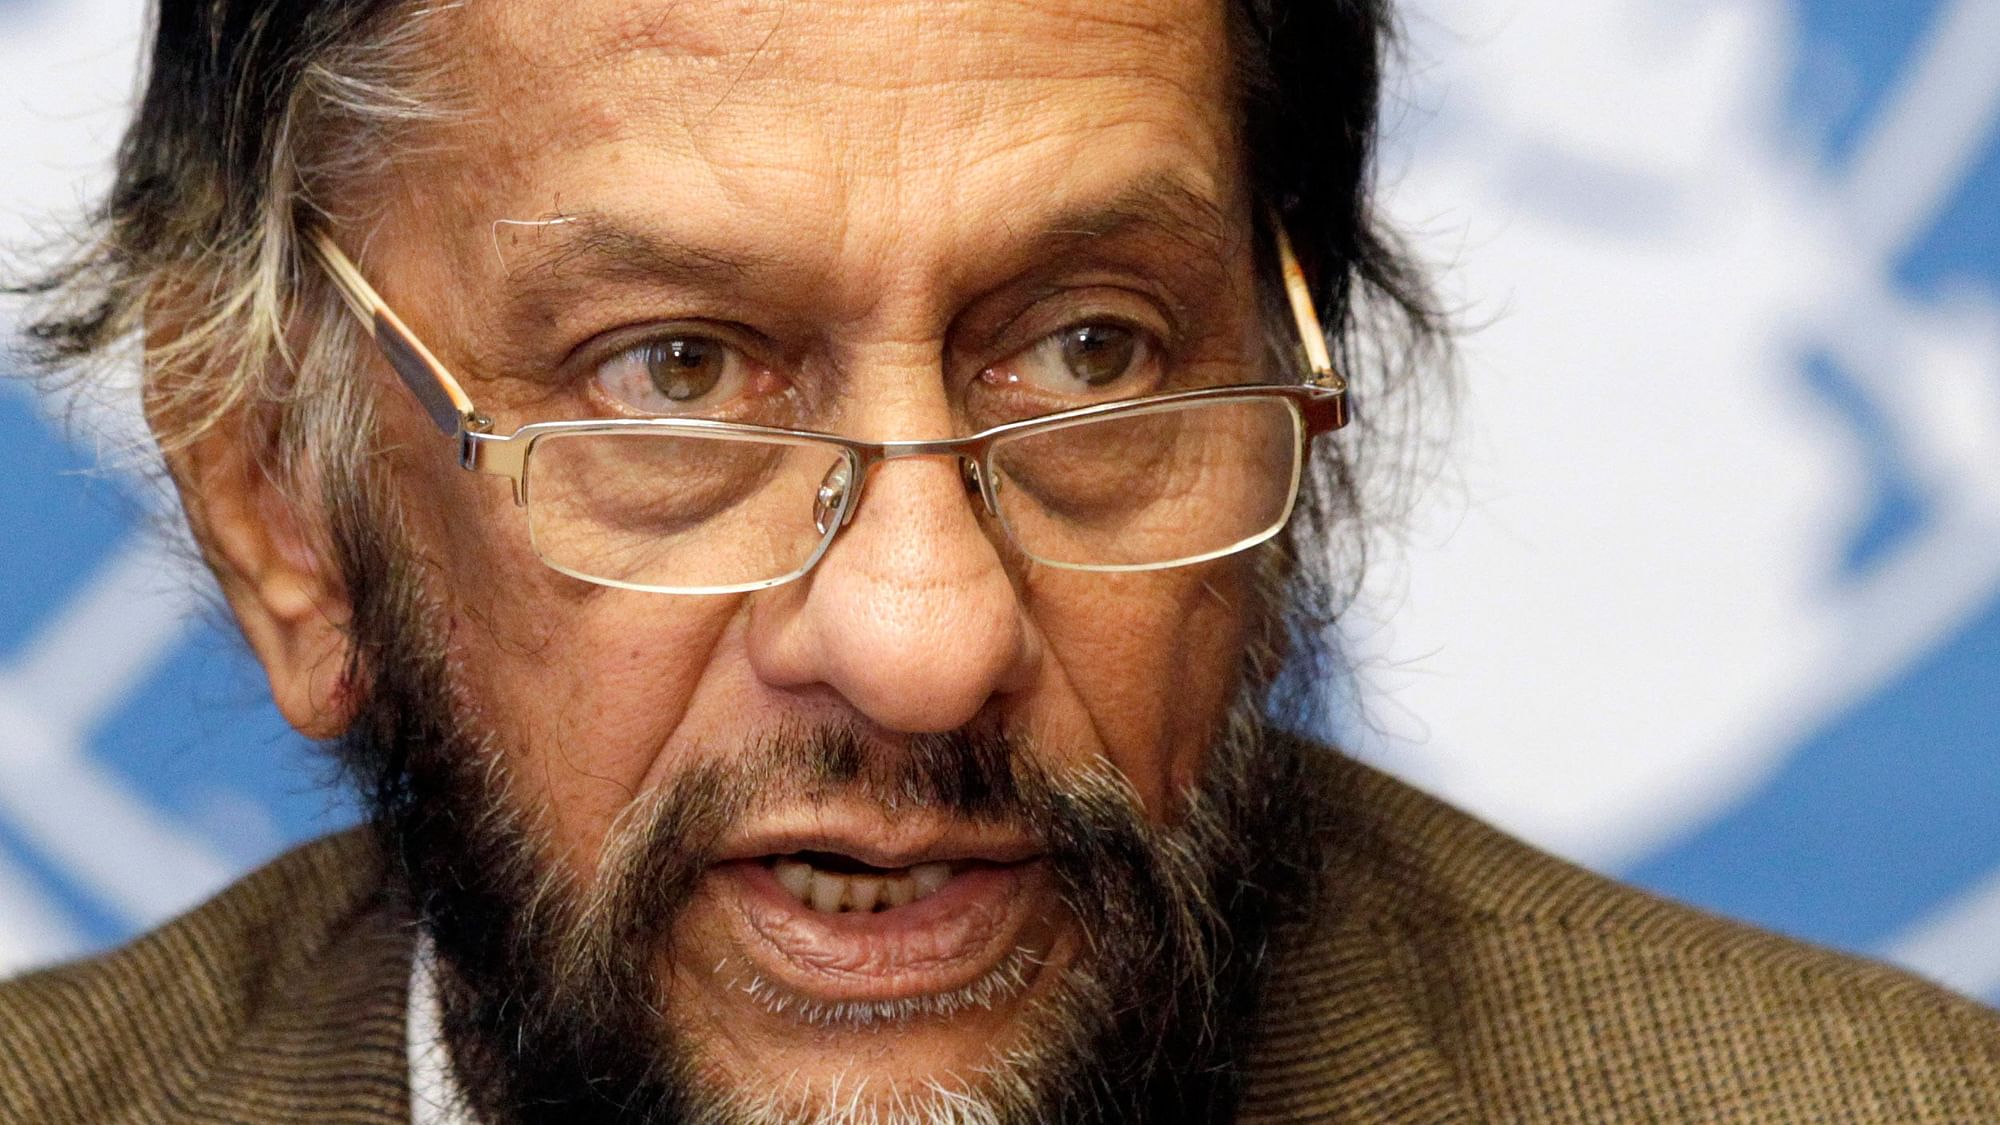 RK Pachauri in an interview to <i>The Guardian</i> pleads innocence. Complainant takes offence over attempts to reveal her identity. (Photo: Reuters)